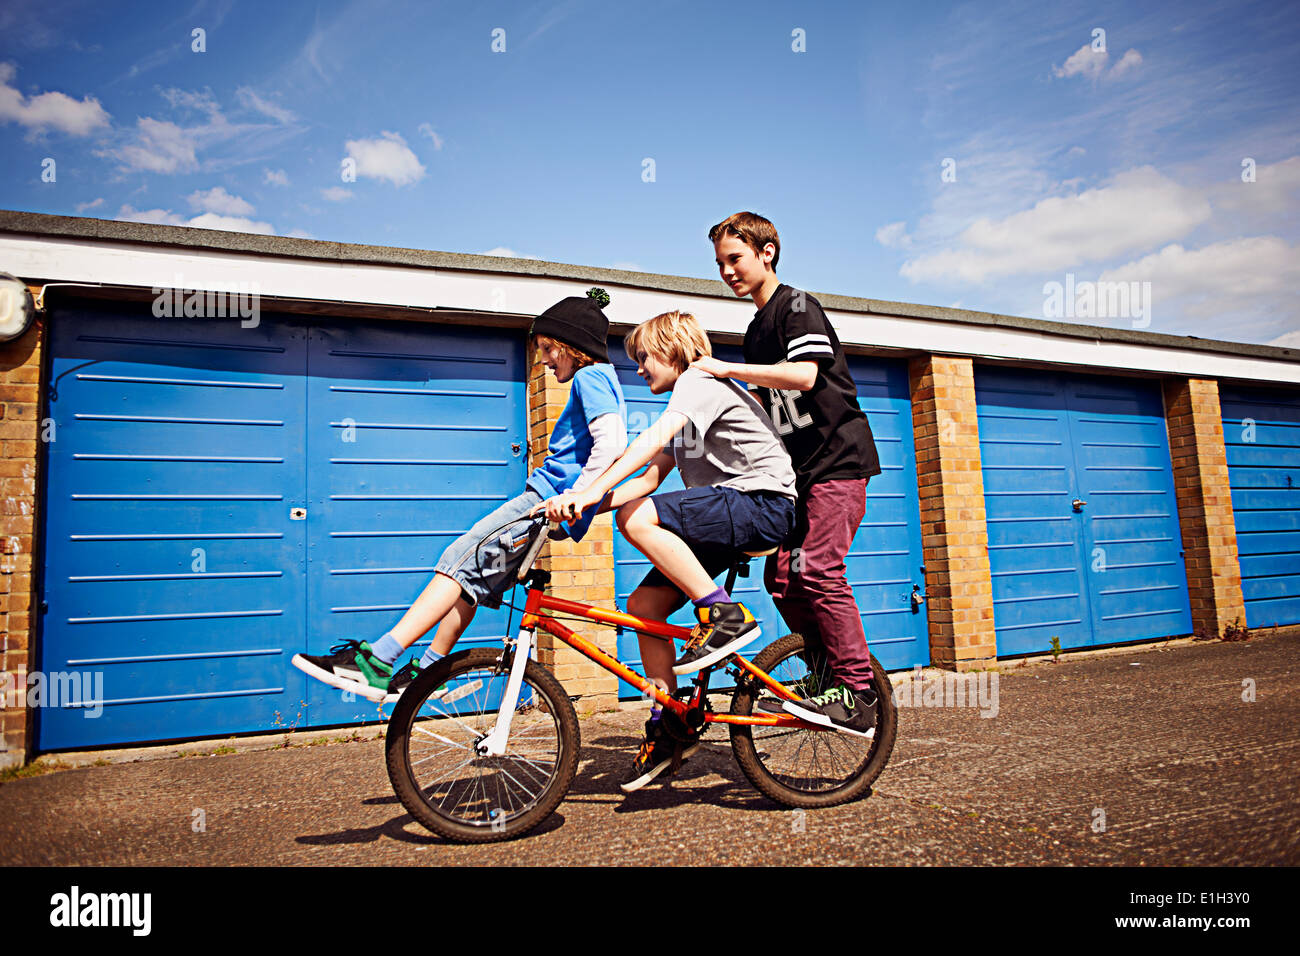 Boy giving two friends a ride on bike Stock Photo